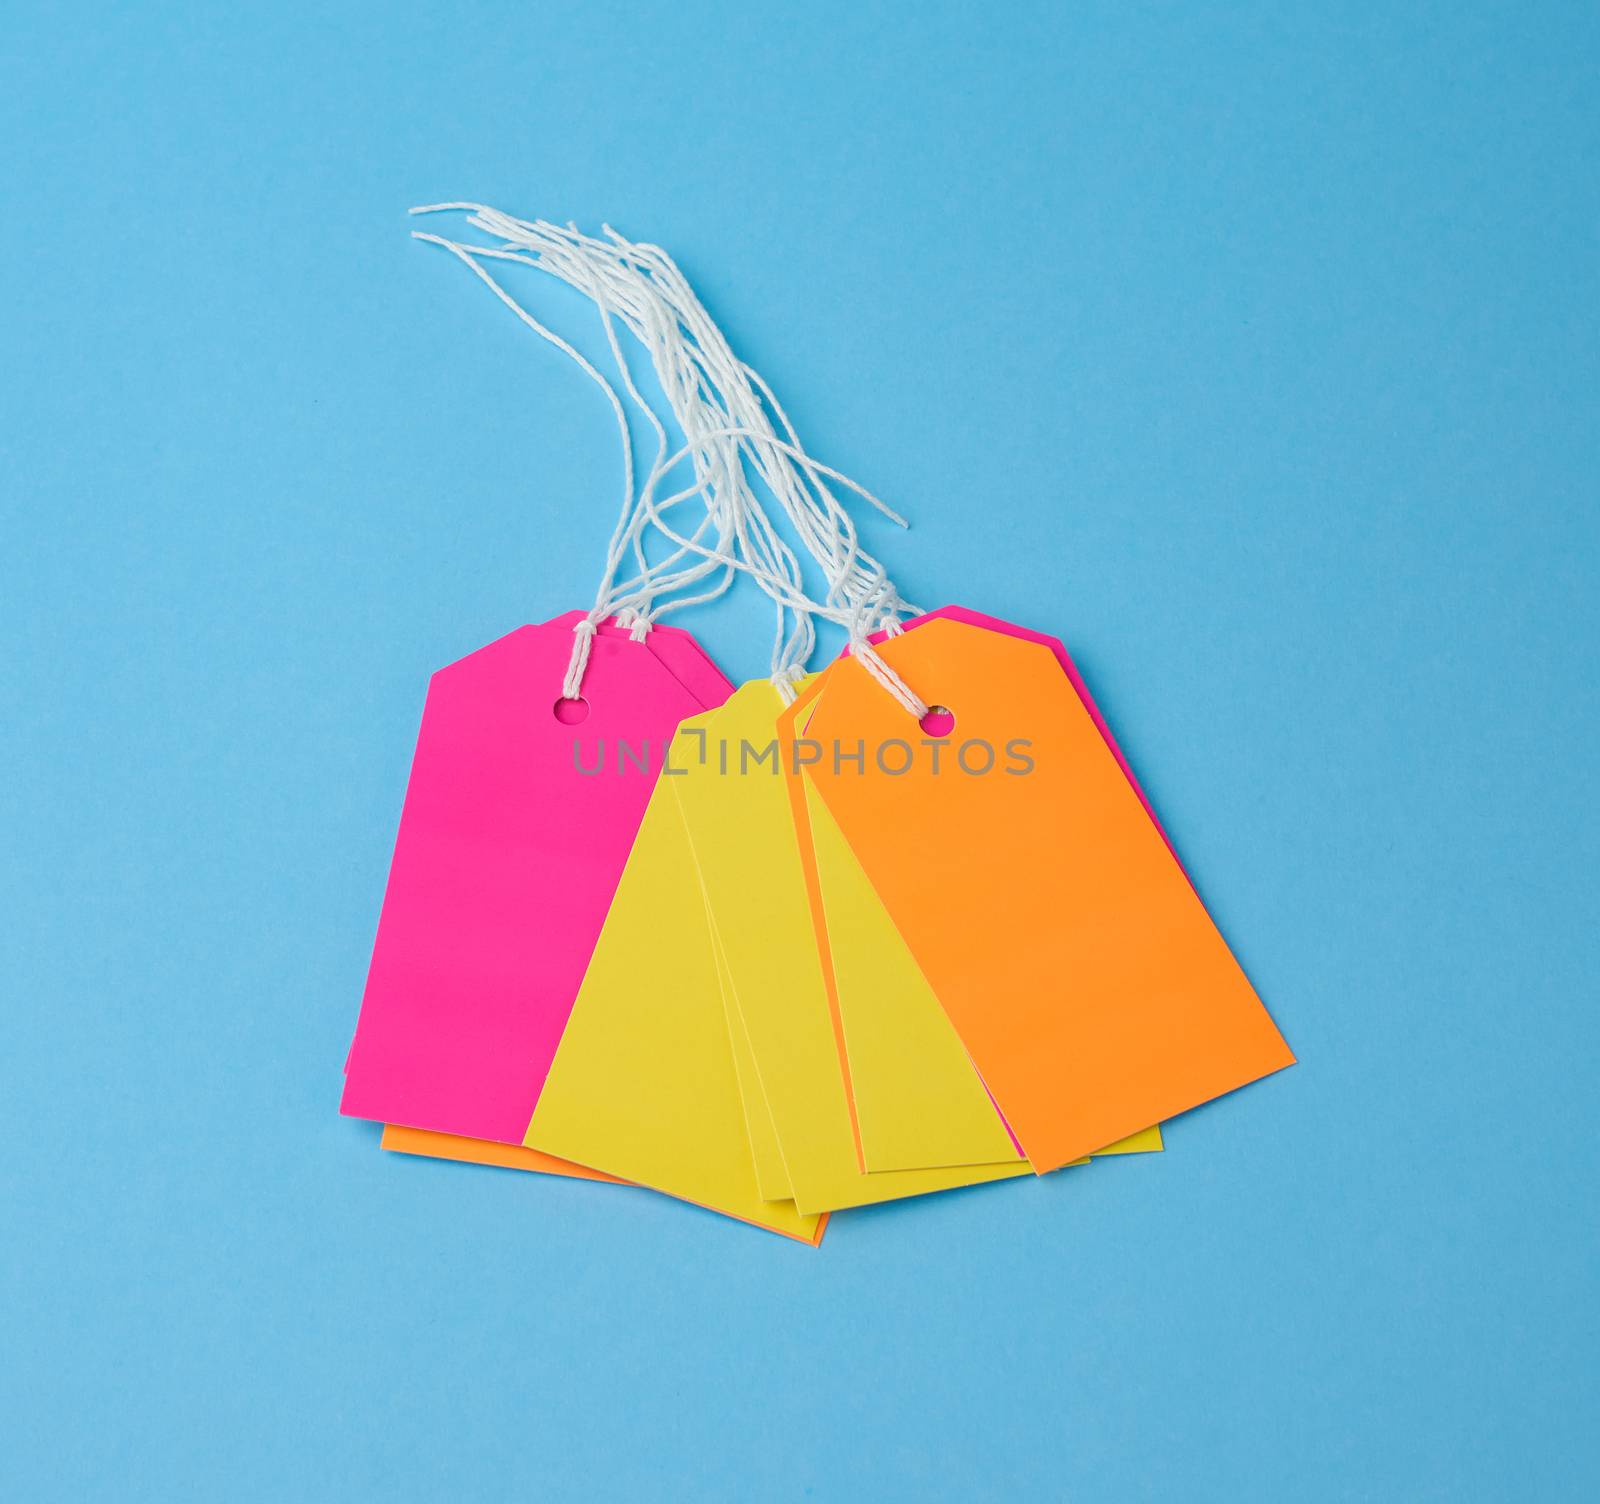 Stack empty color paper tags tied with white string. Price tag, gift tag, sale tag  on the blue background, close up